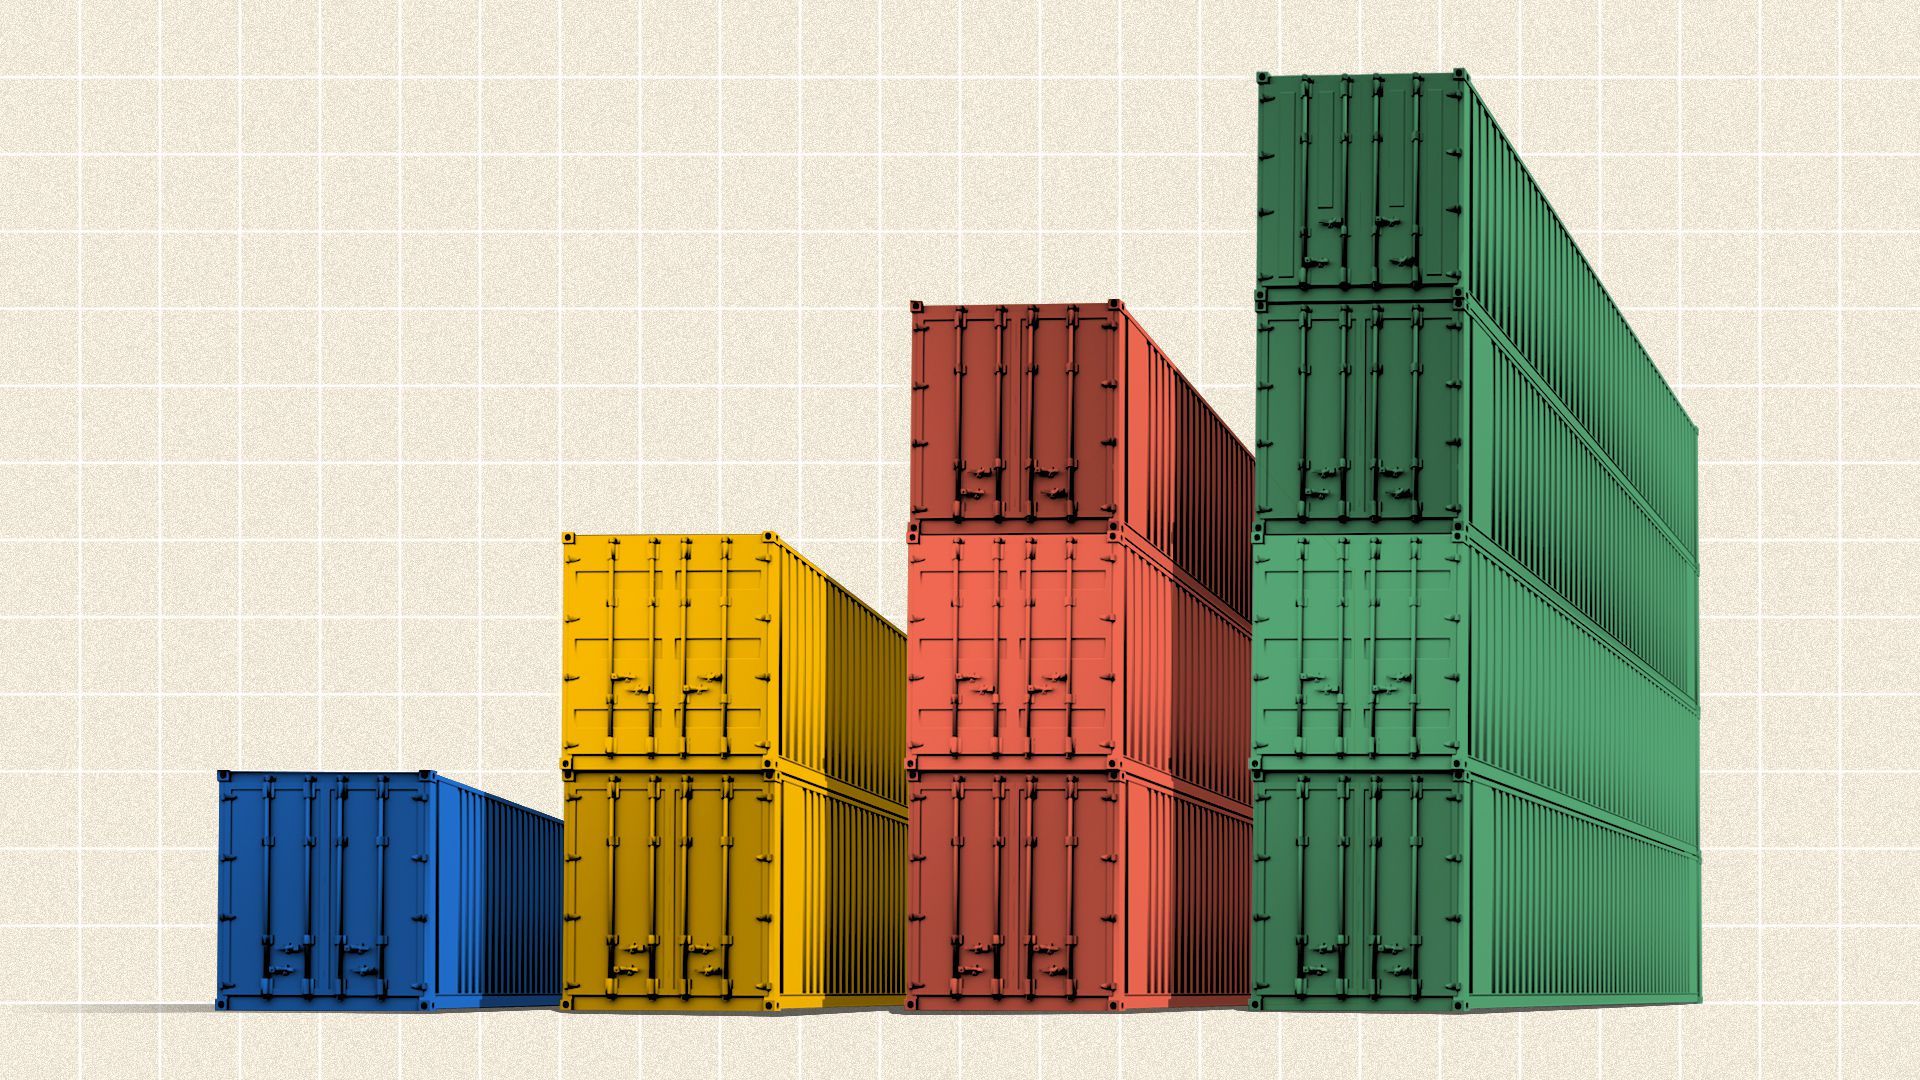 Illustration of shipping containers arranged like a bar graph.